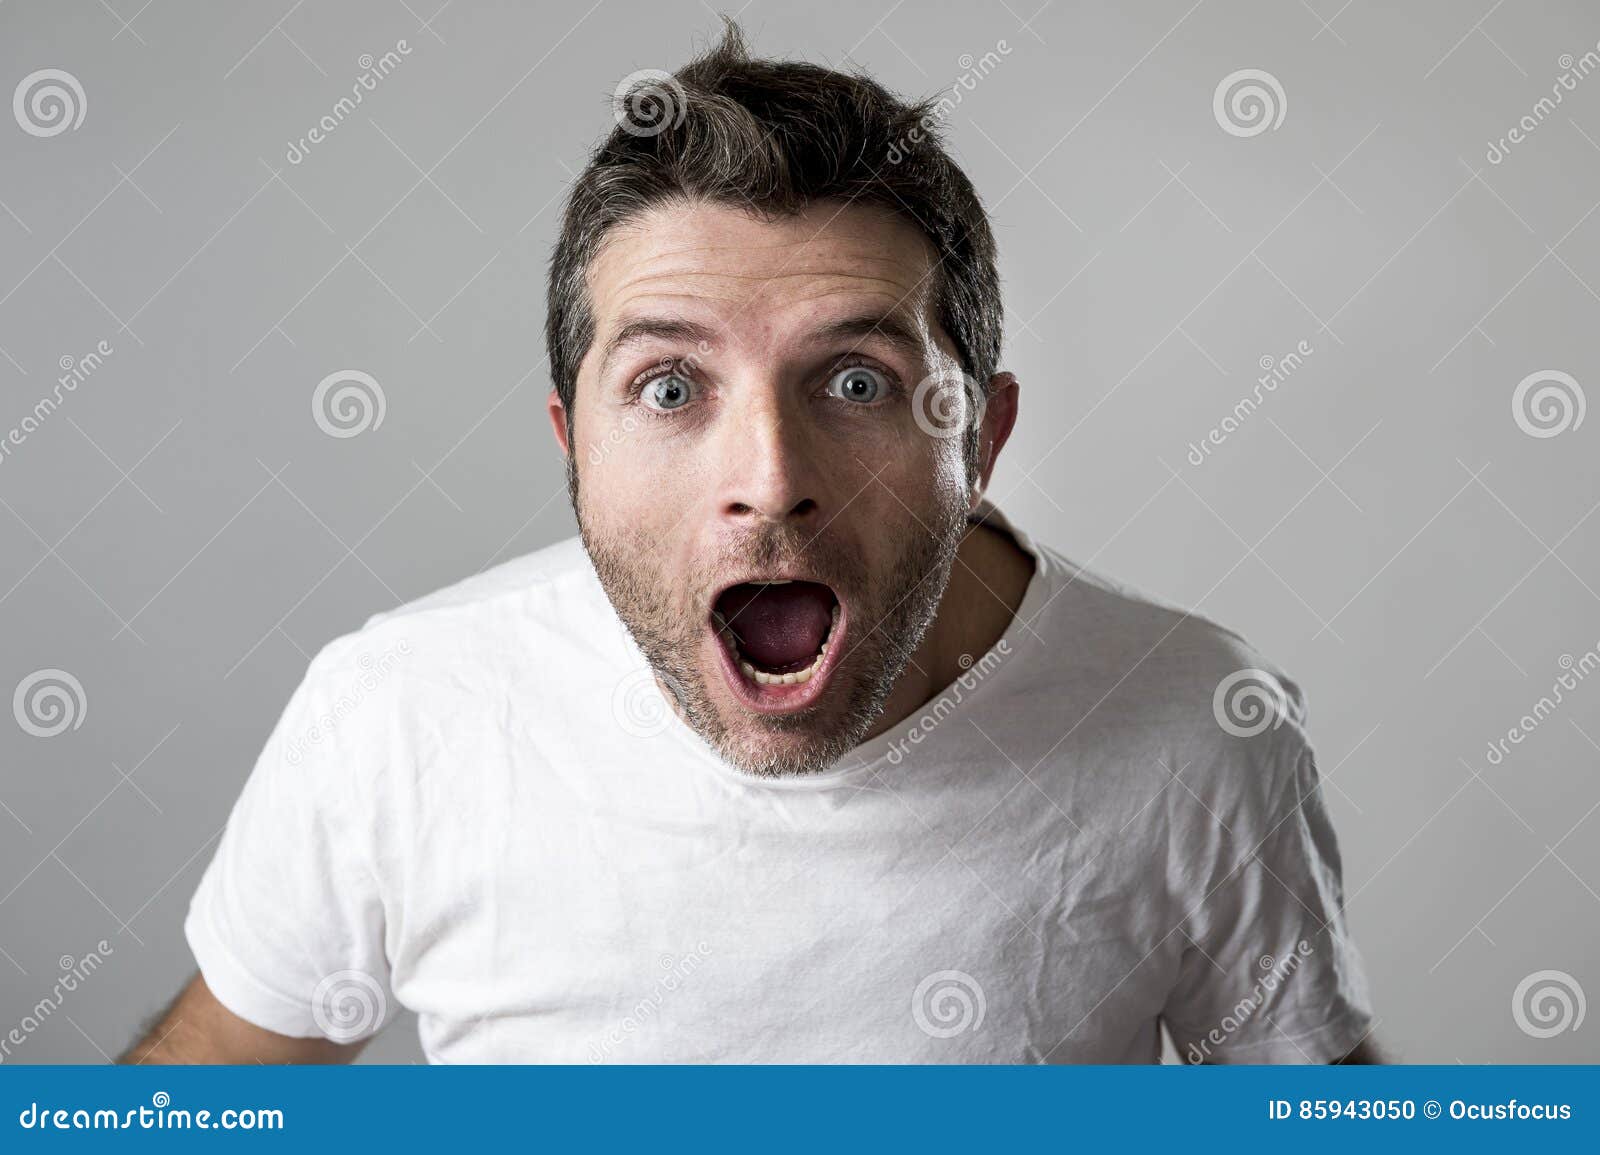 young attractive man astonished amazed in shock surprise face expression and shock emotion